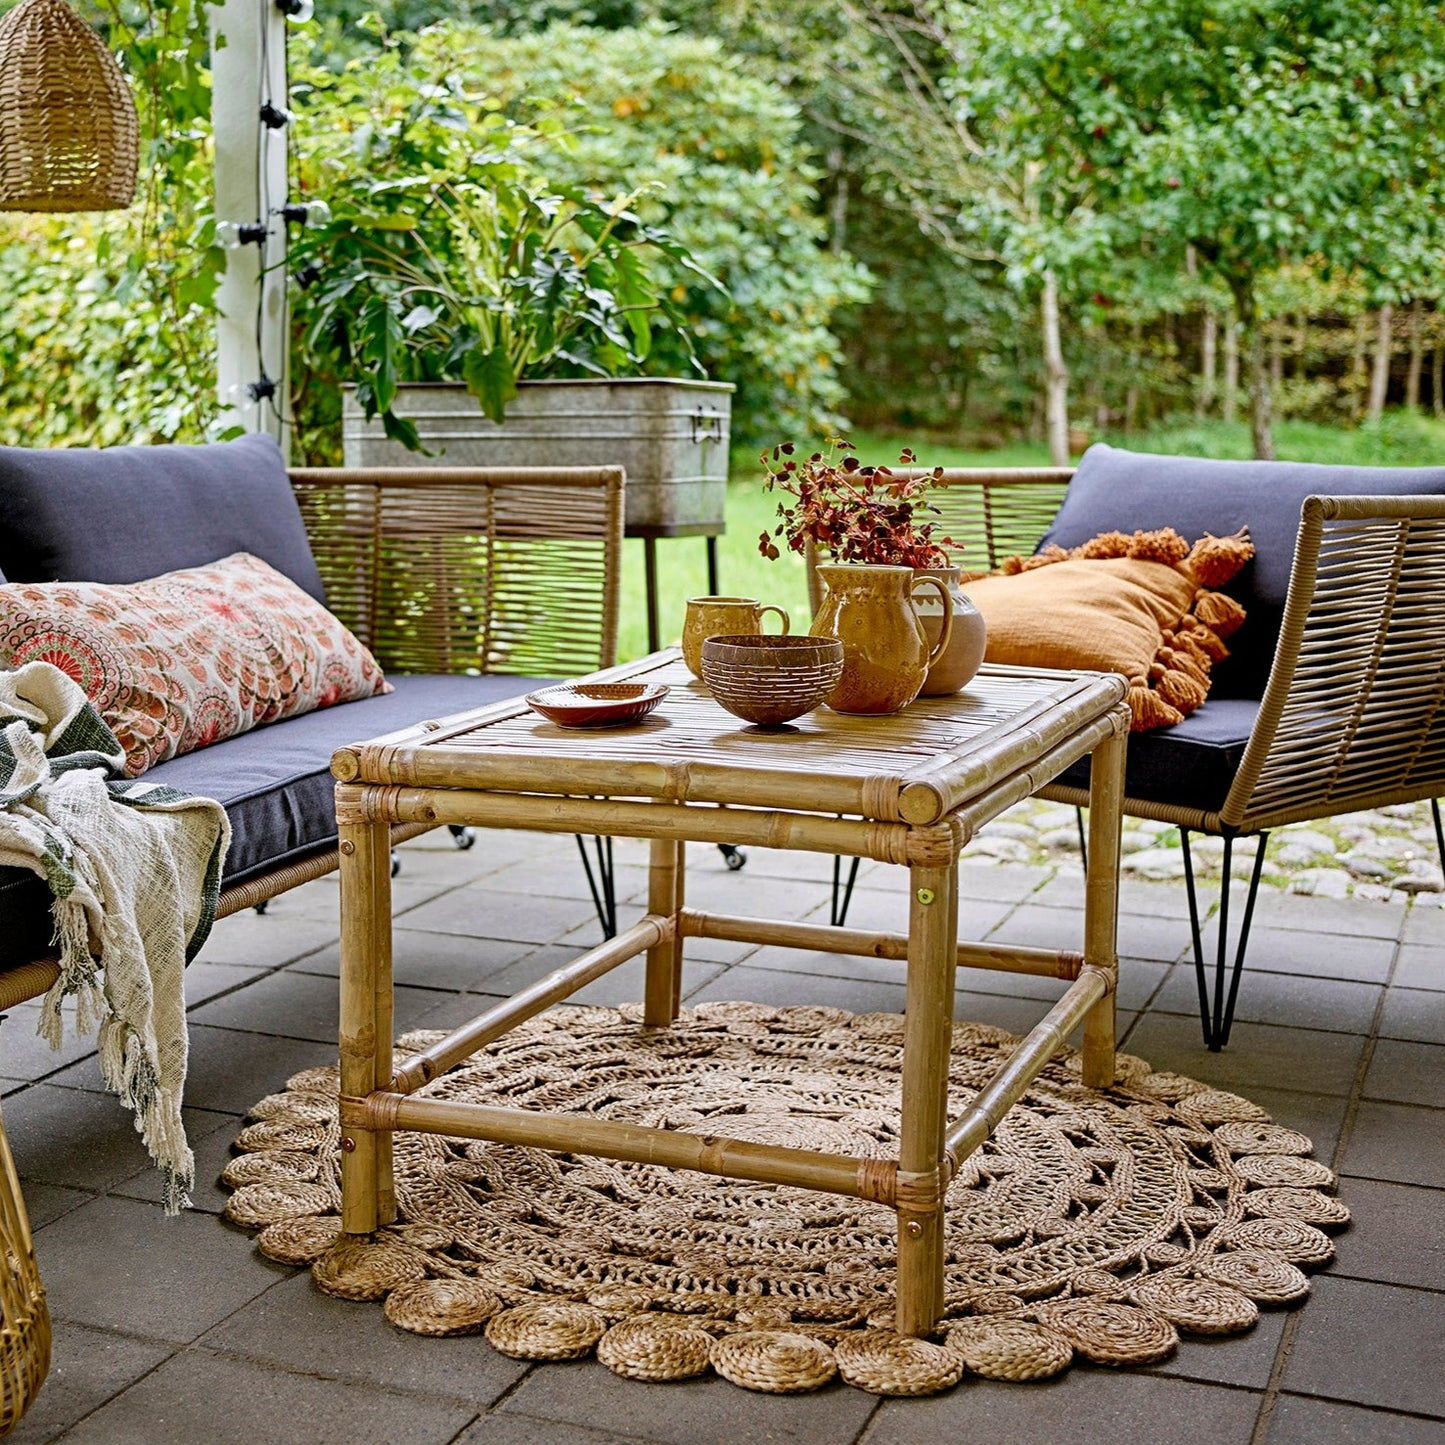 Bloomingville Outdoor Sole Bamboo Coffee Table in Natural